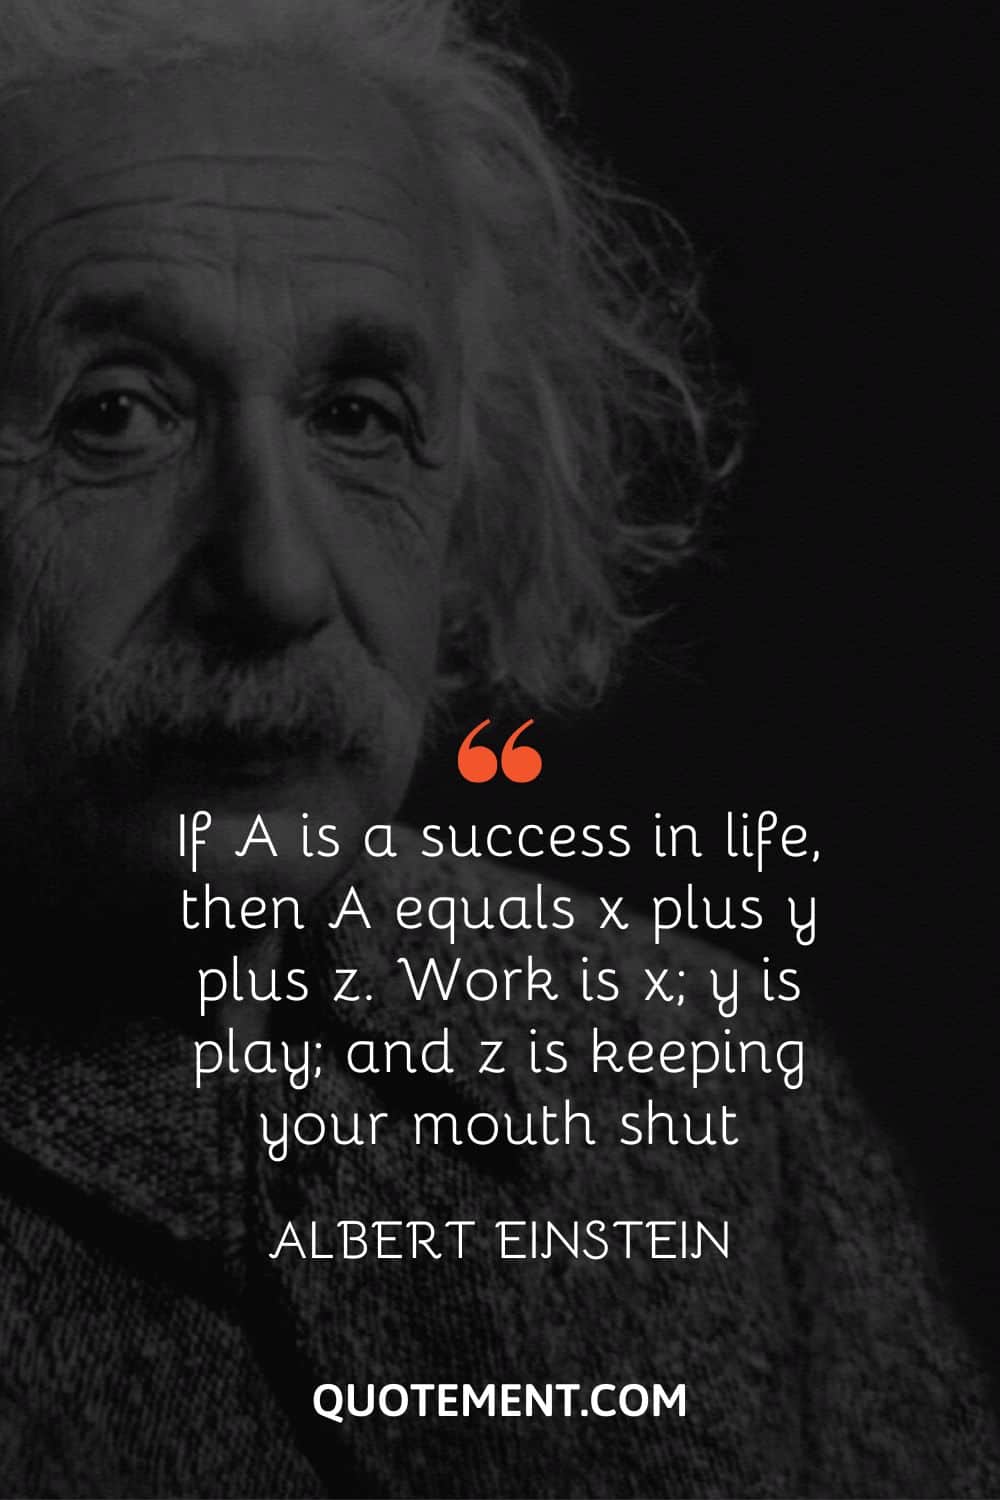 If A is a success in life, then A equals x plus y plus z